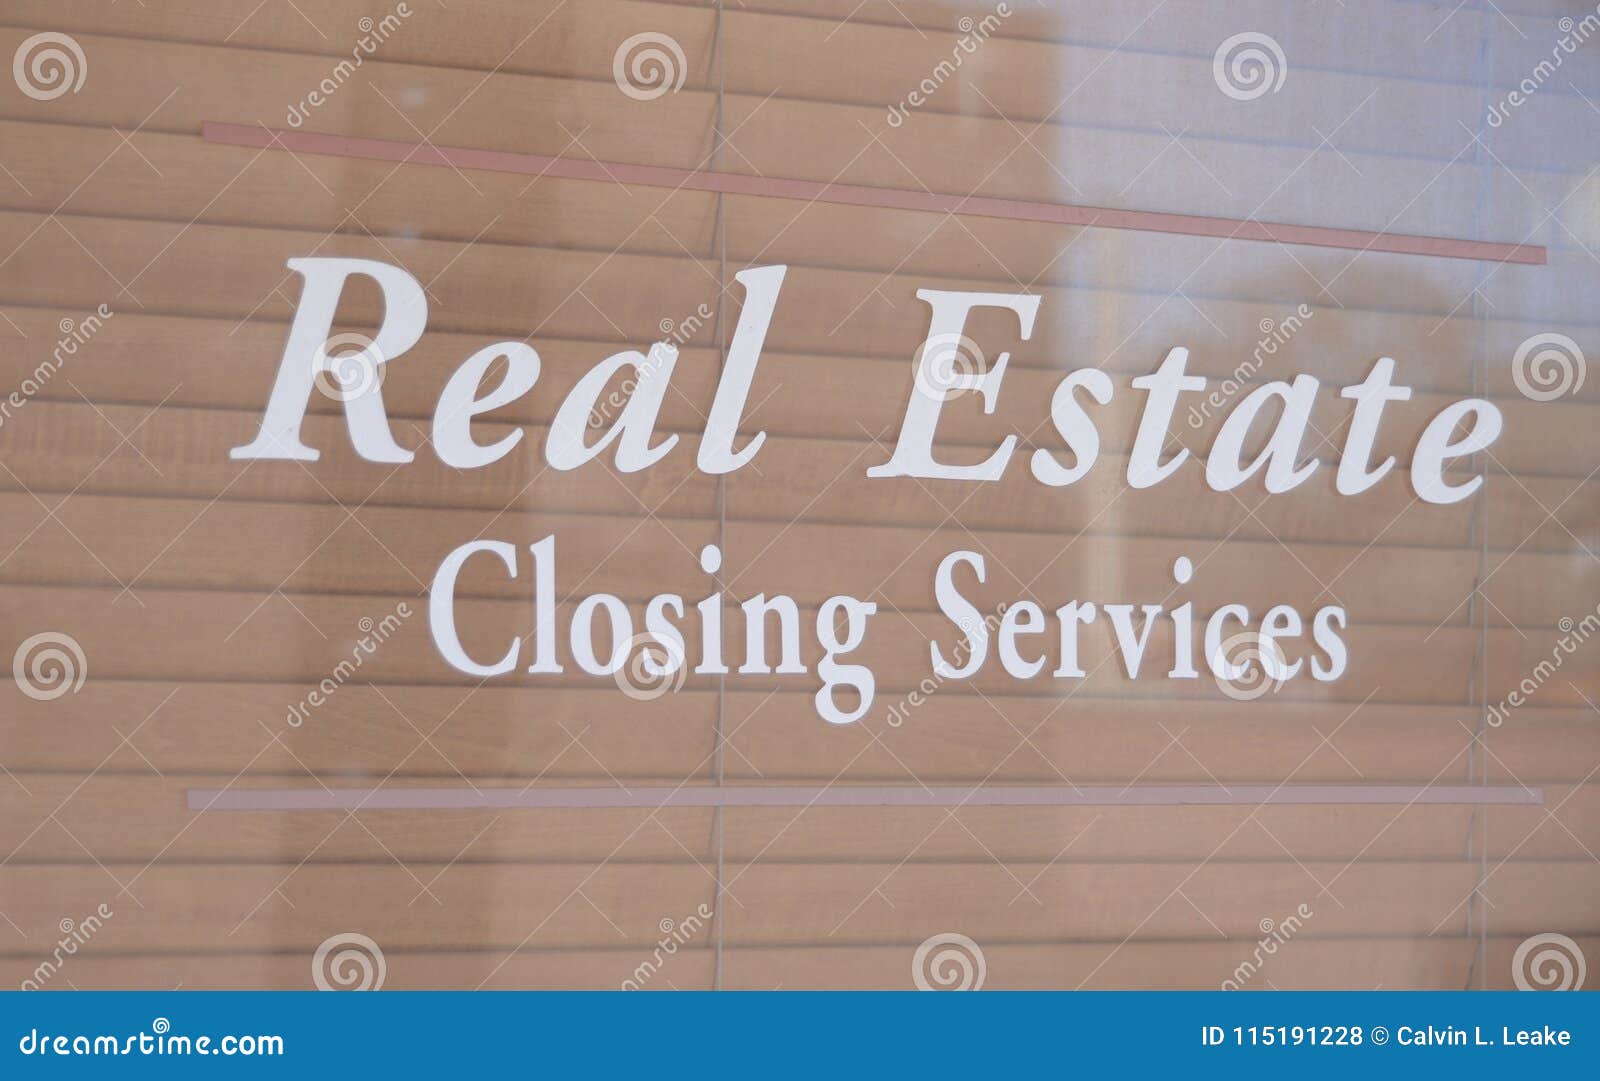 real estate closing services